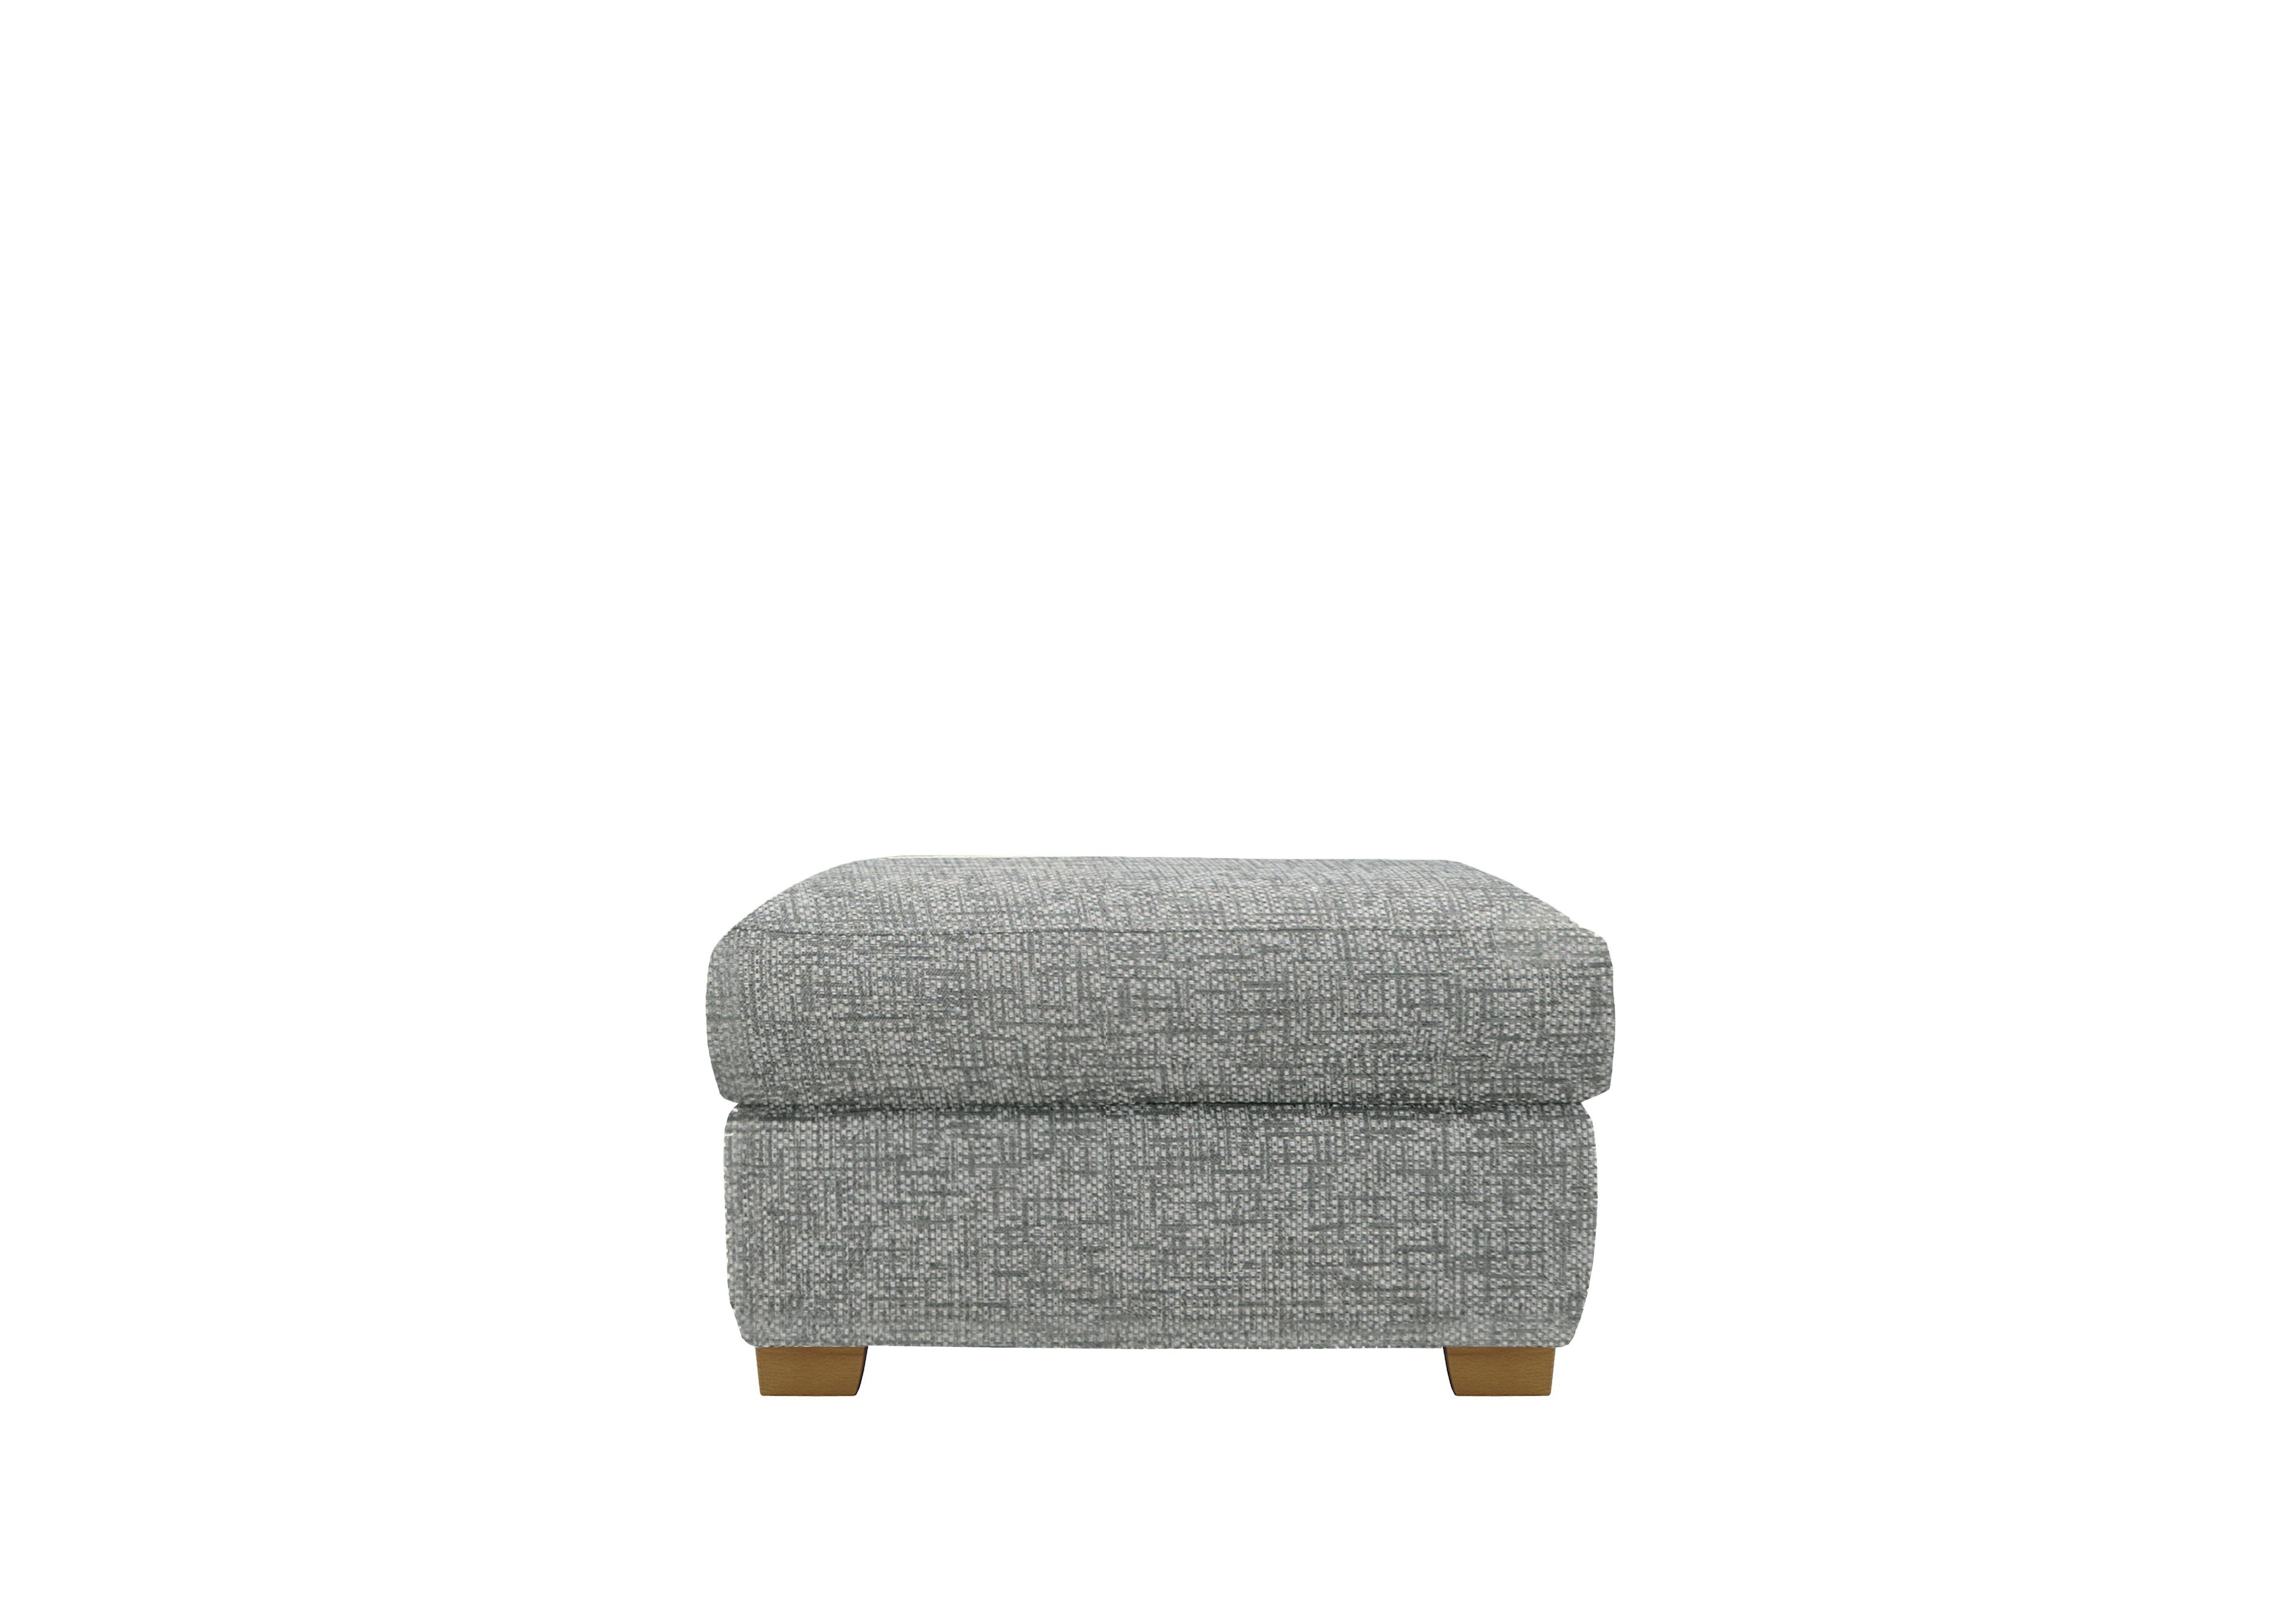 Seattle Fabric Storage Footstool with Wooden Feet in B030 Remco Light Grey Ok on Furniture Village